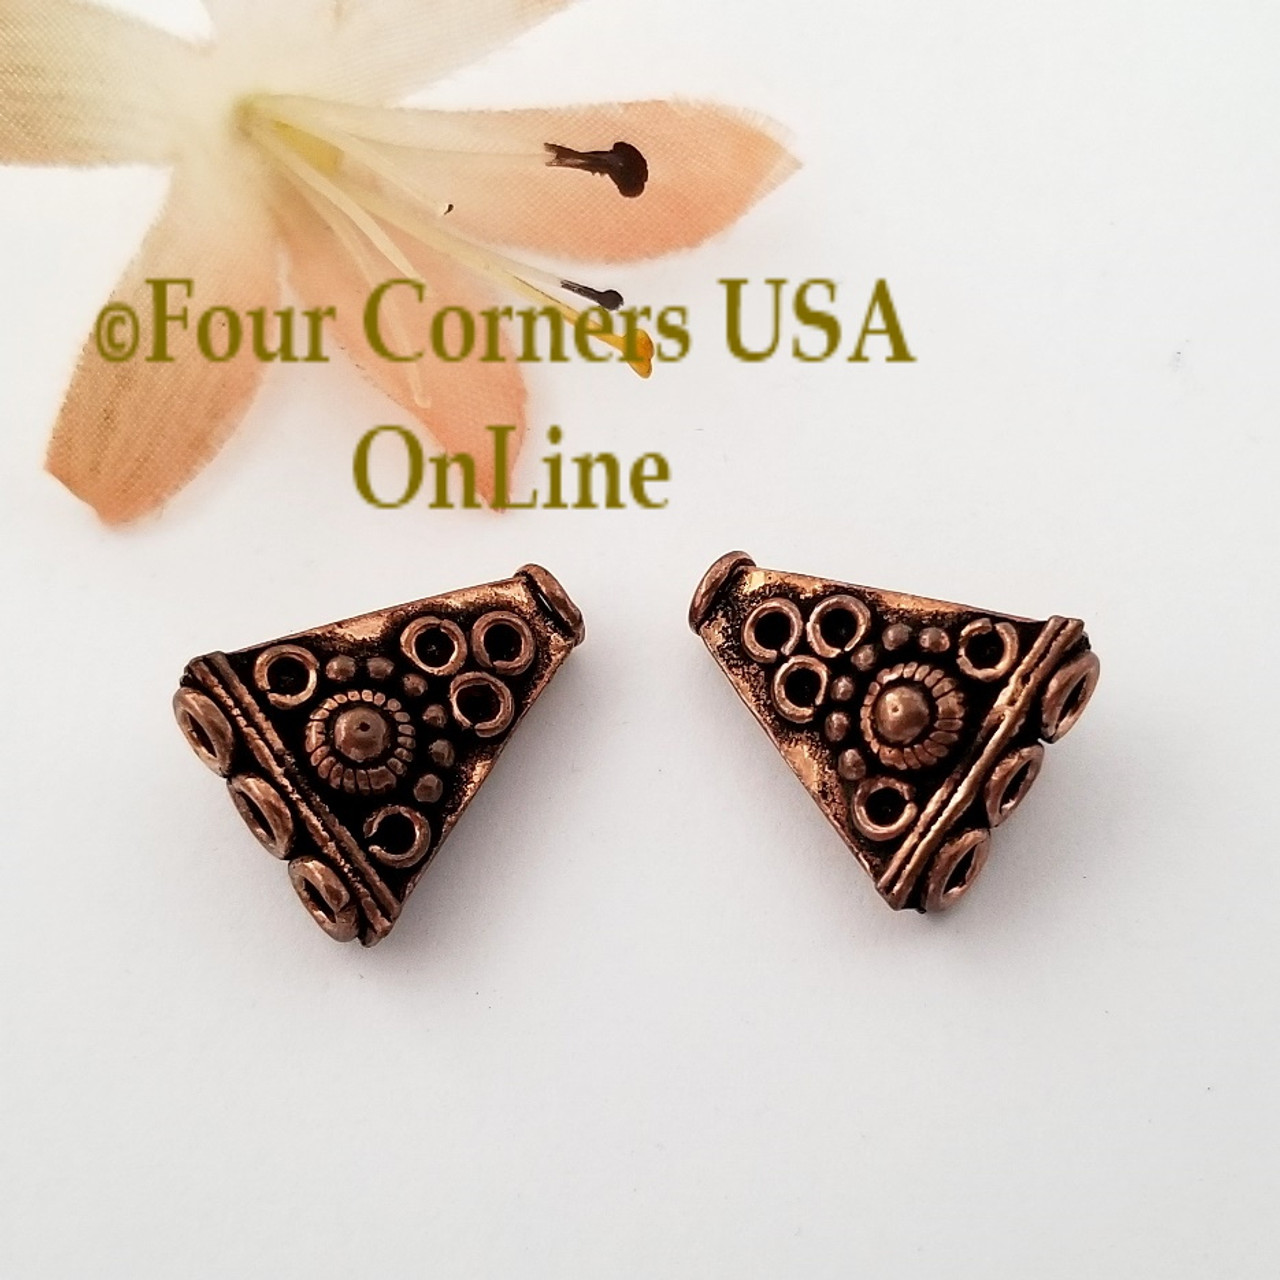 Copper Single to Three Strand Connector Jewelry Finding 10 Pieces Closeout  Final Sale BDZ-2117 - Four Corners USA Online